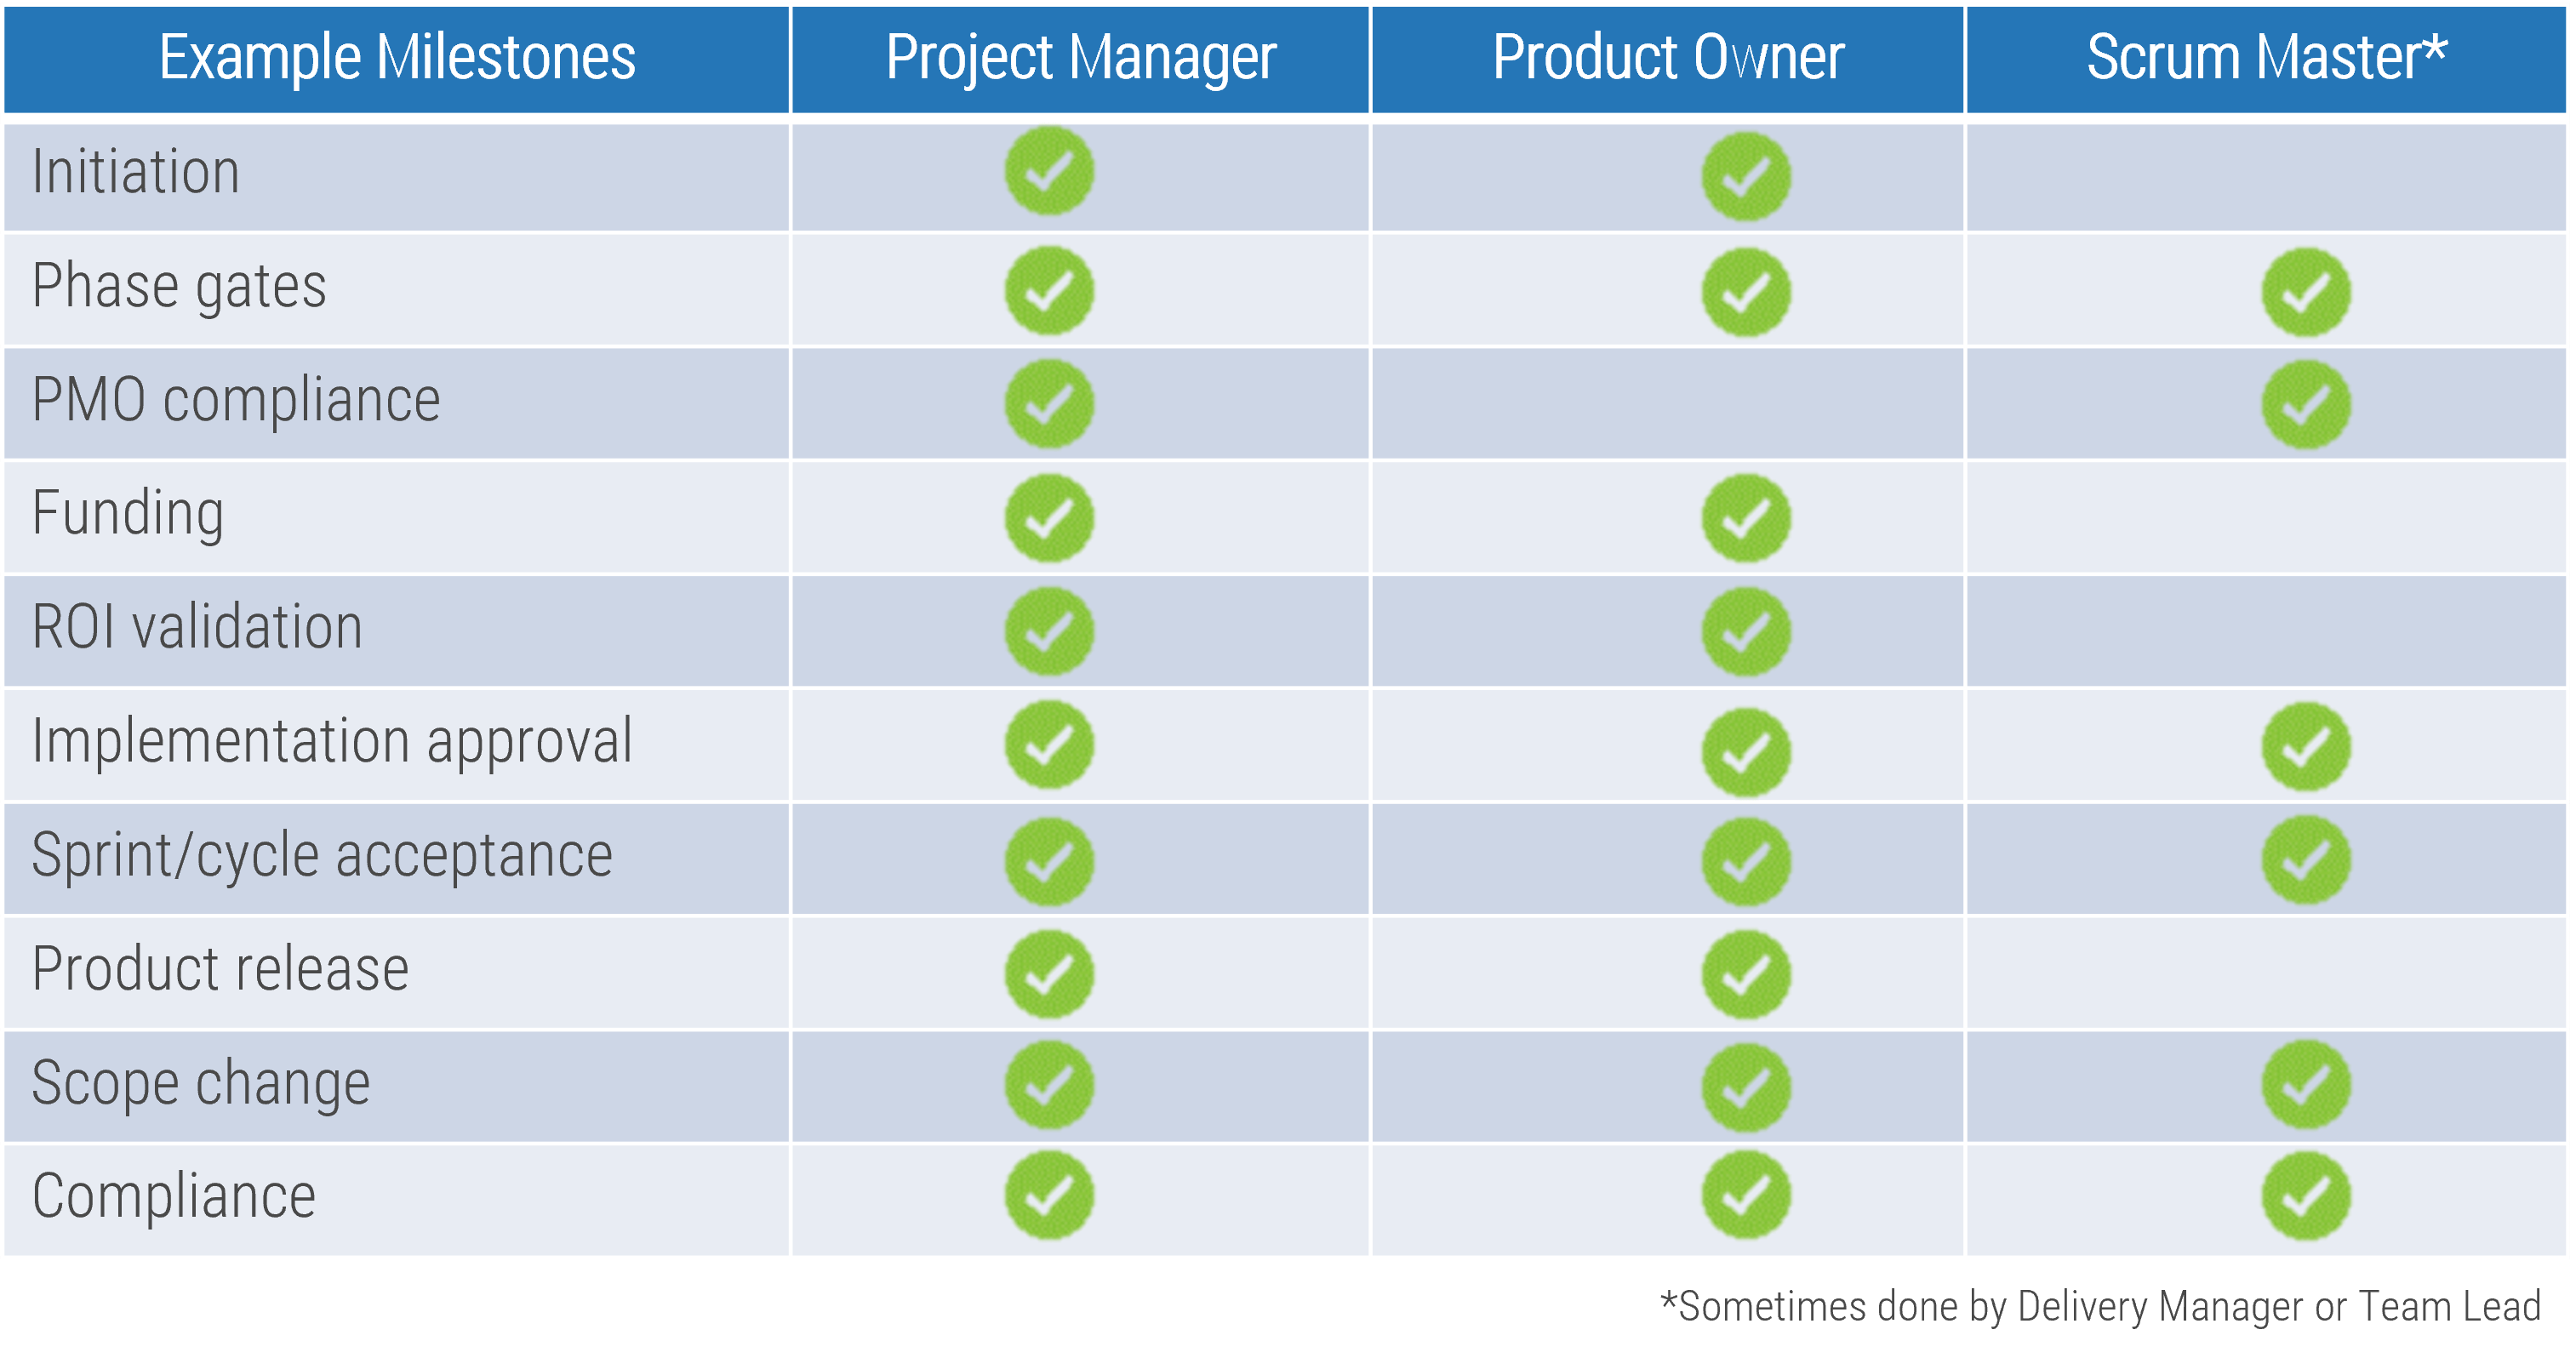 An image of a table with the following column headings: Example Milestones; Project Manager; Product Owner; Scrum Master*